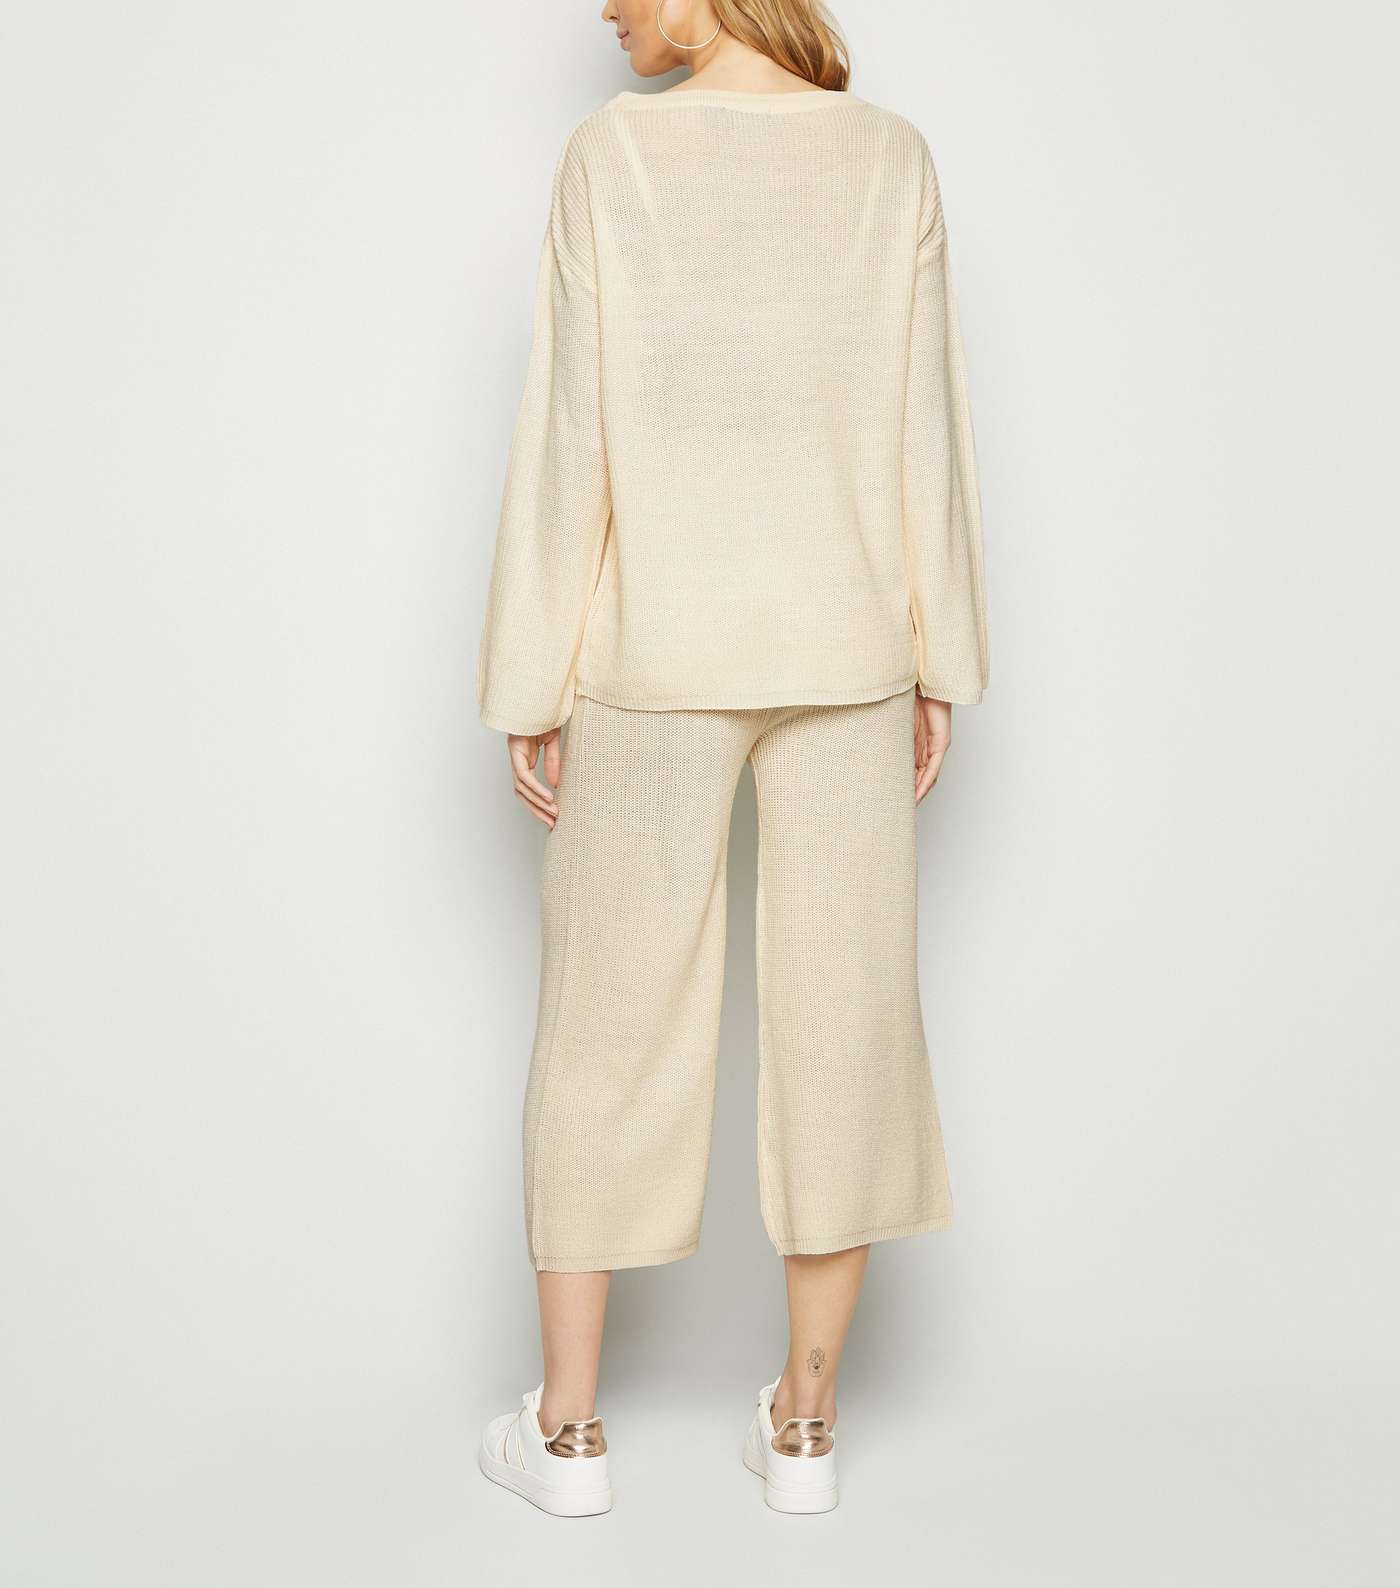 Brave Soul Cream Knit Jumper and Trousers Set Image 2